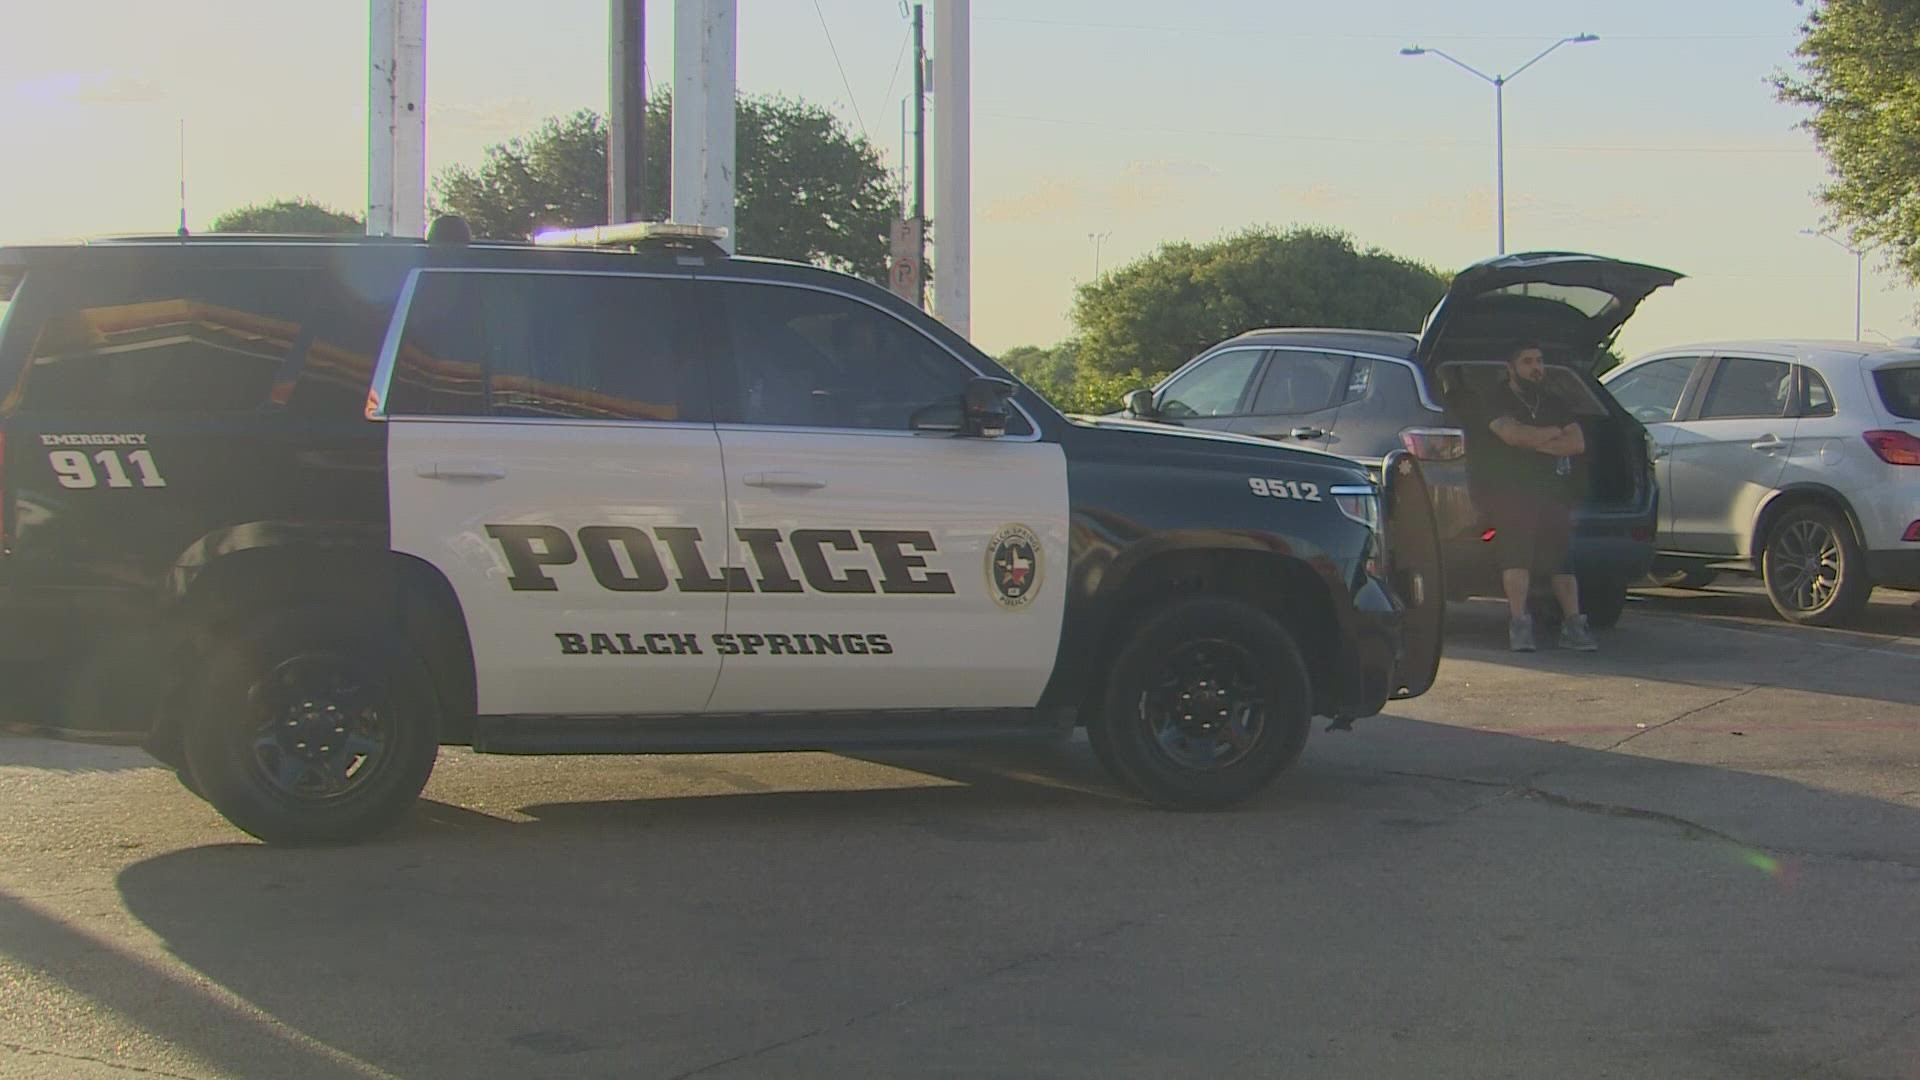 Balch Springs police say the incident happened on westbound Interstate 20 between Beltline Road and Seagoville Road.